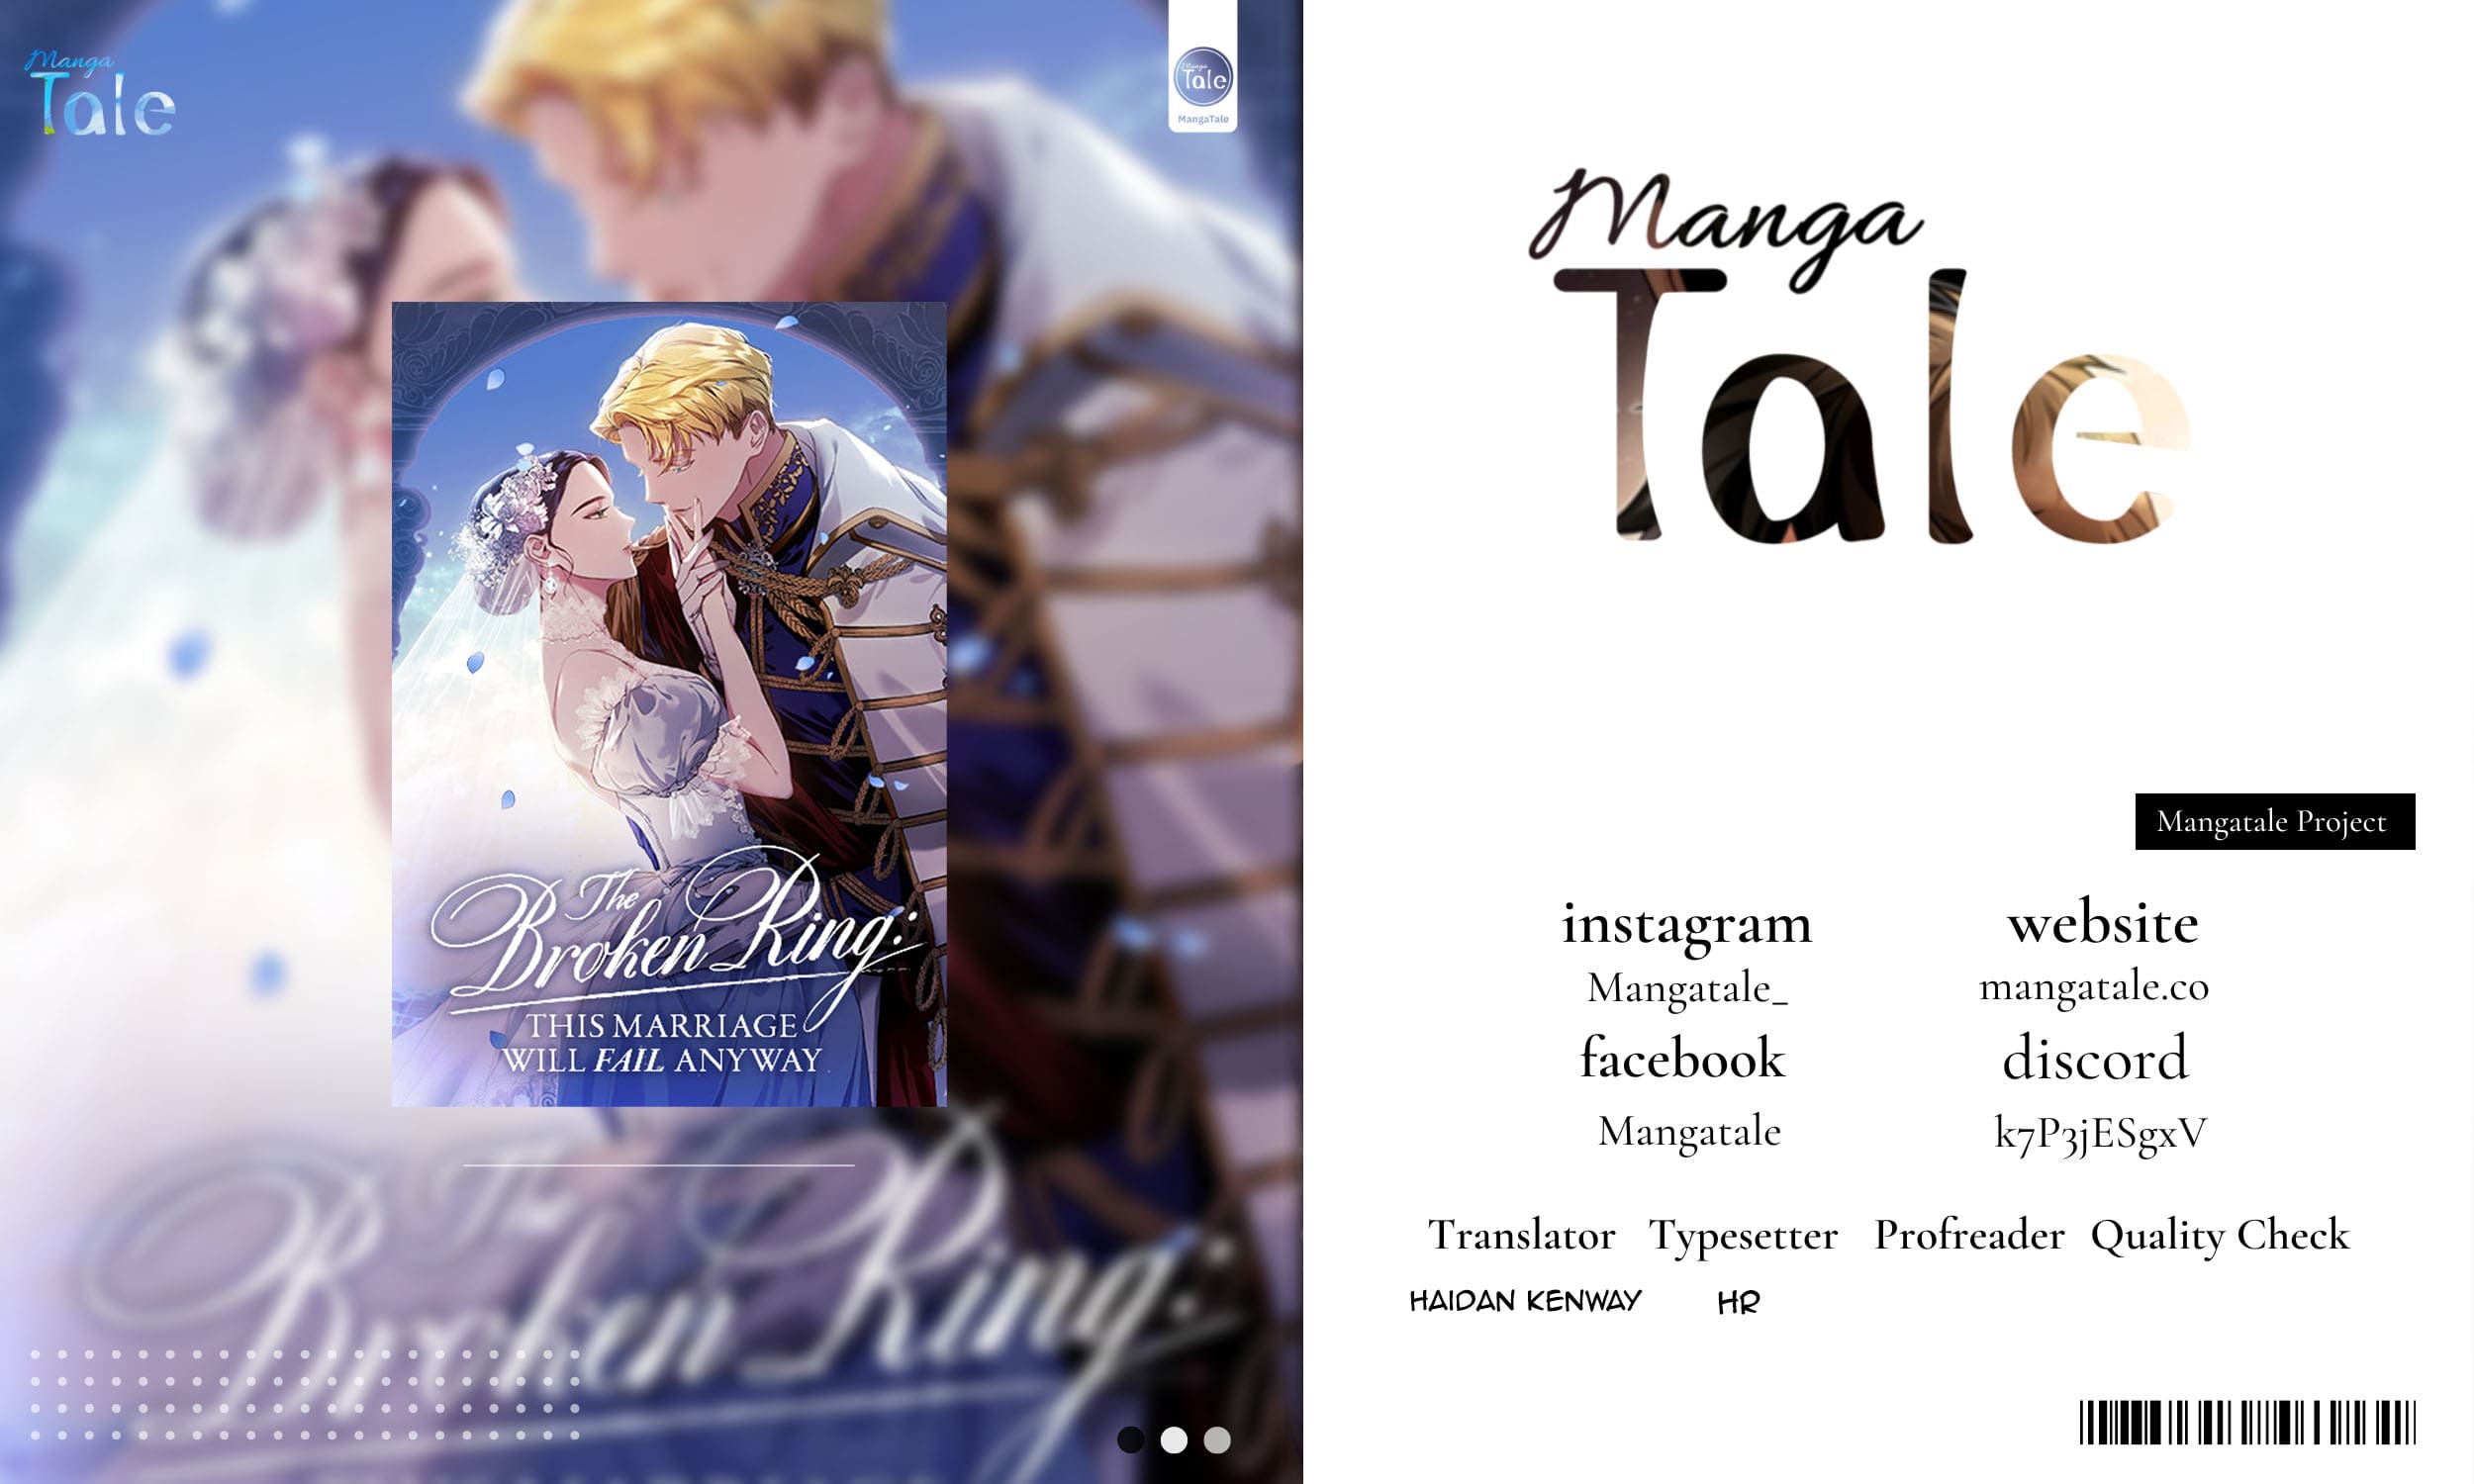 This marriage is bound to fail. The broken Ring this marriage will fail anyway Manga. Манга the broken Ring this marriage will fail anyway на русском. Manhwa broken Ring. This marriage is bound to fail anyway.